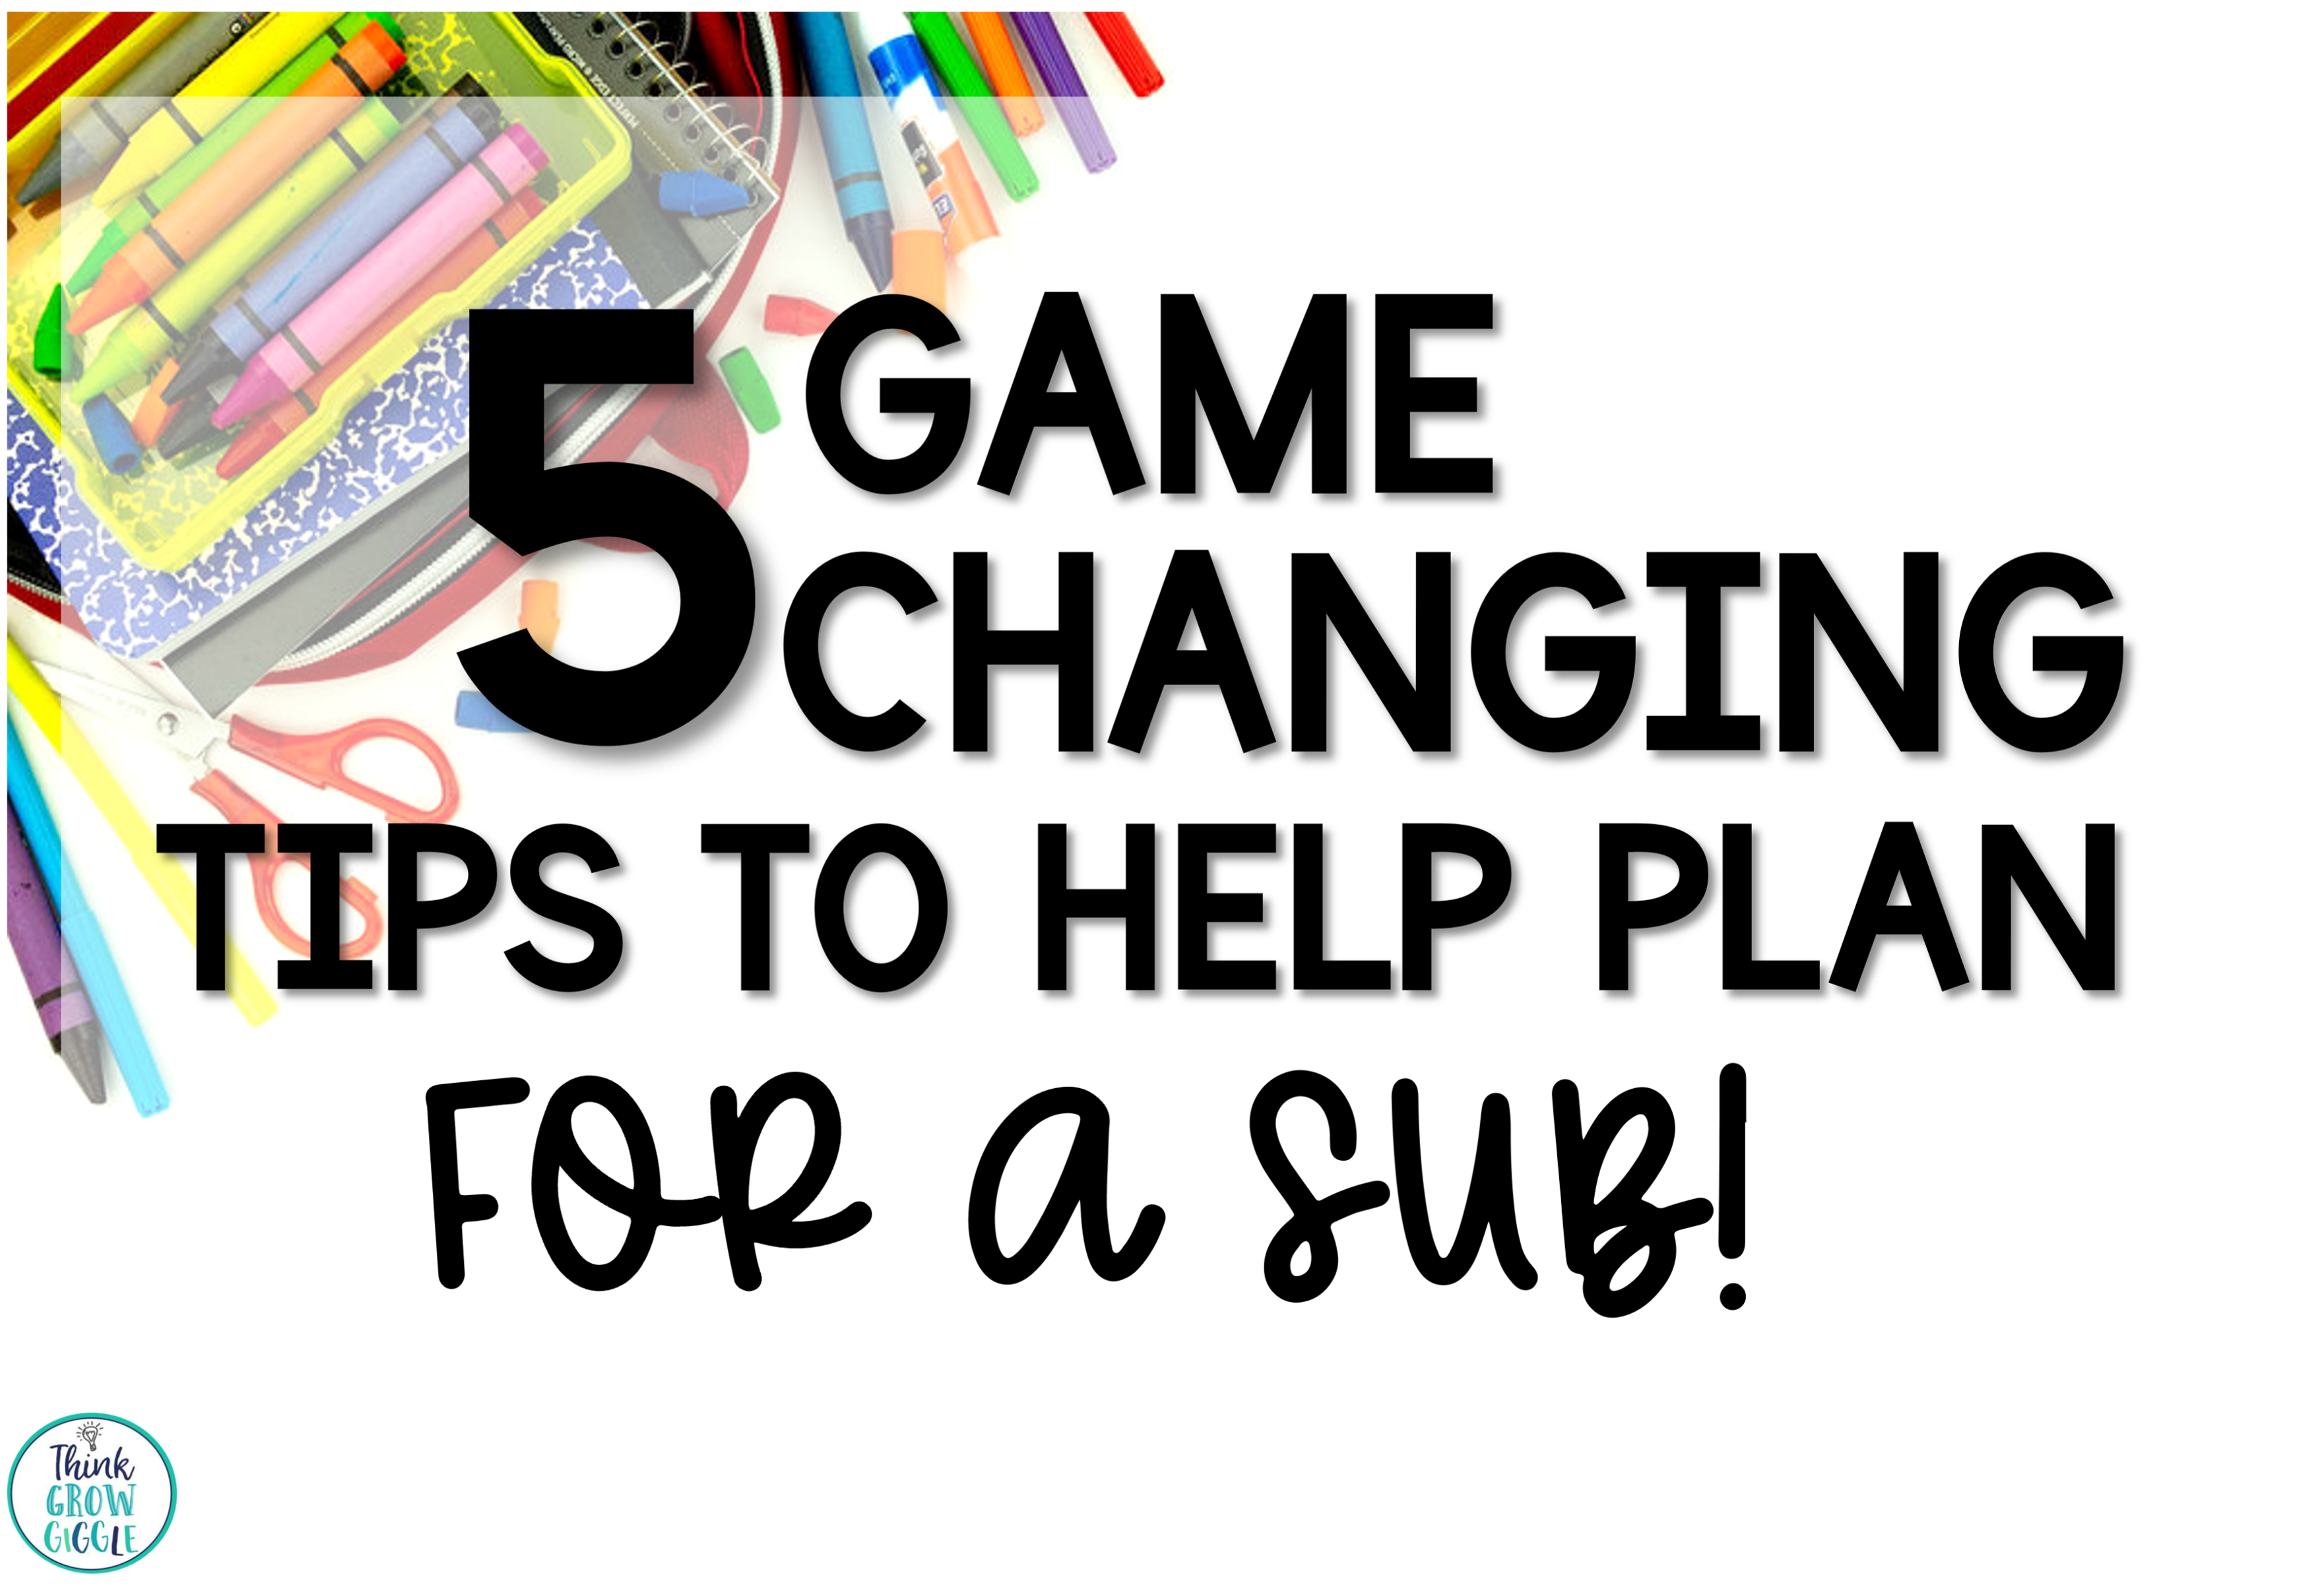 5 Game Changing Tips to Help Plan for a Sub